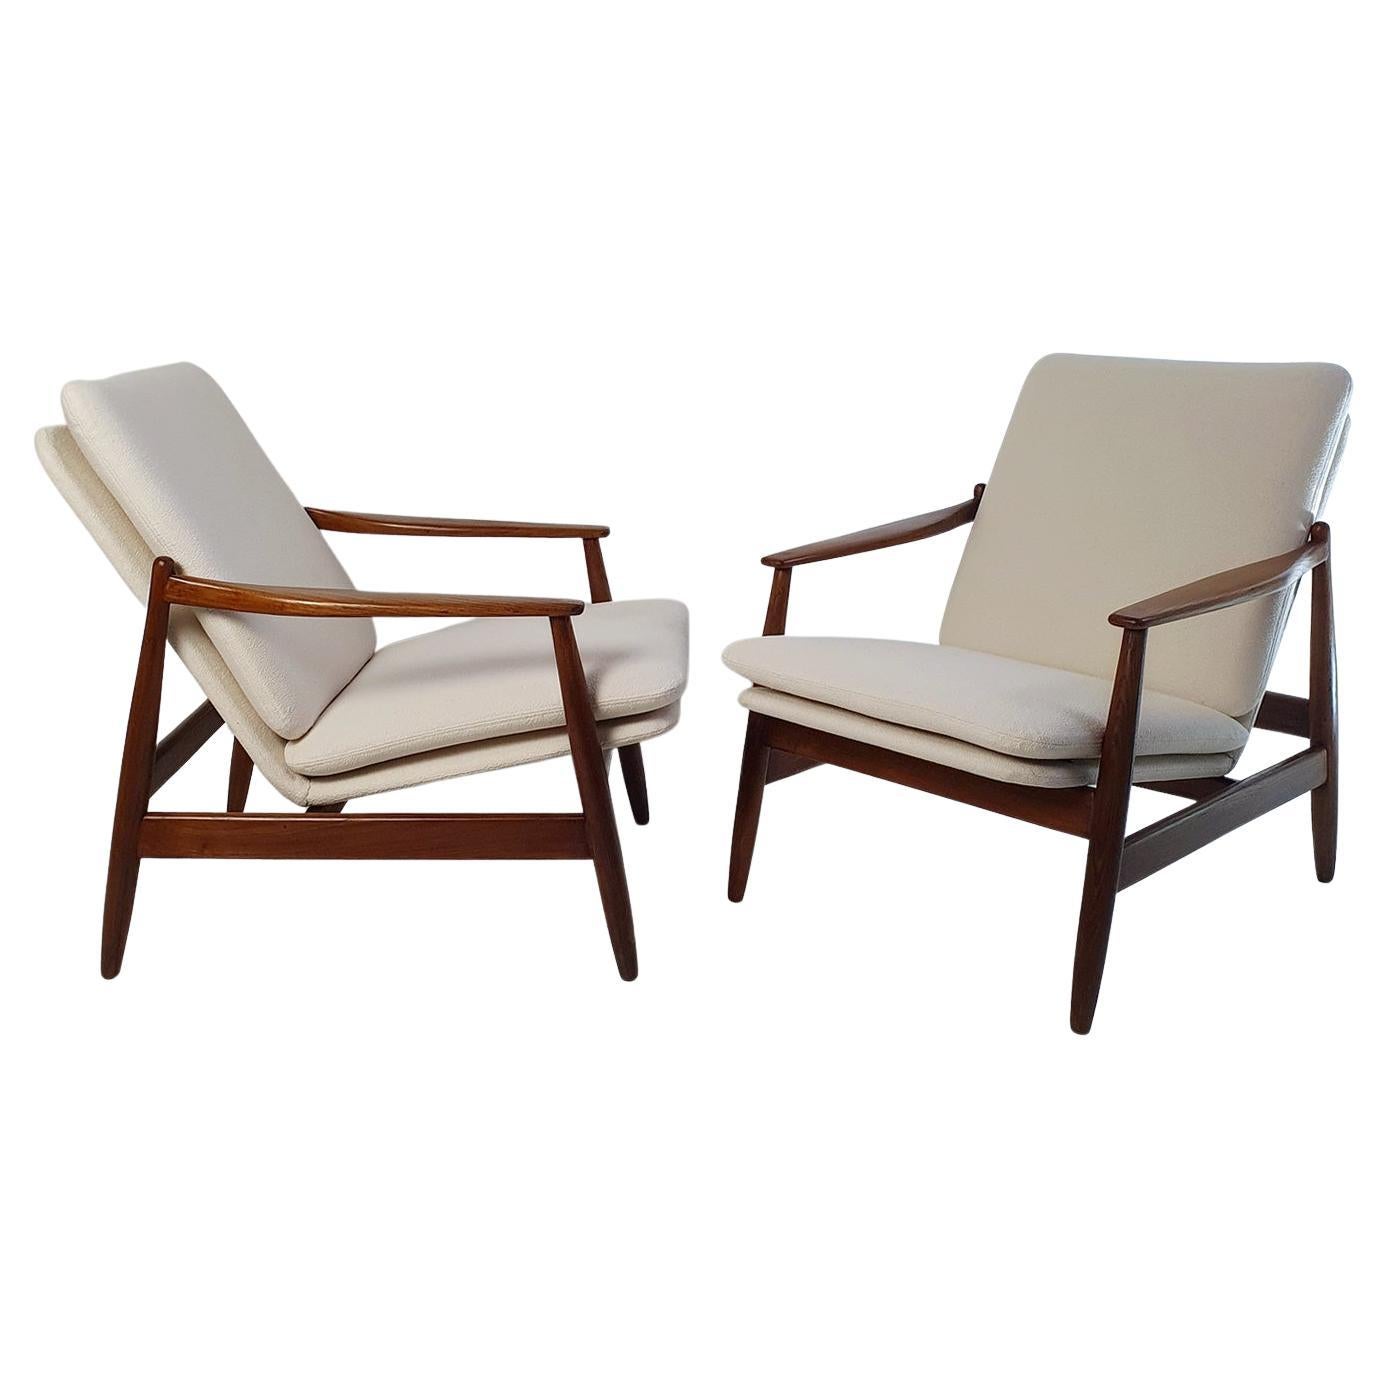 These Italian Pizzetti armchairs are a great example of mid-century modern design that were produced during the 1960s. The chairs have a solid oak frame that has been completely professionally restored, ensuring that they are both sturdy and